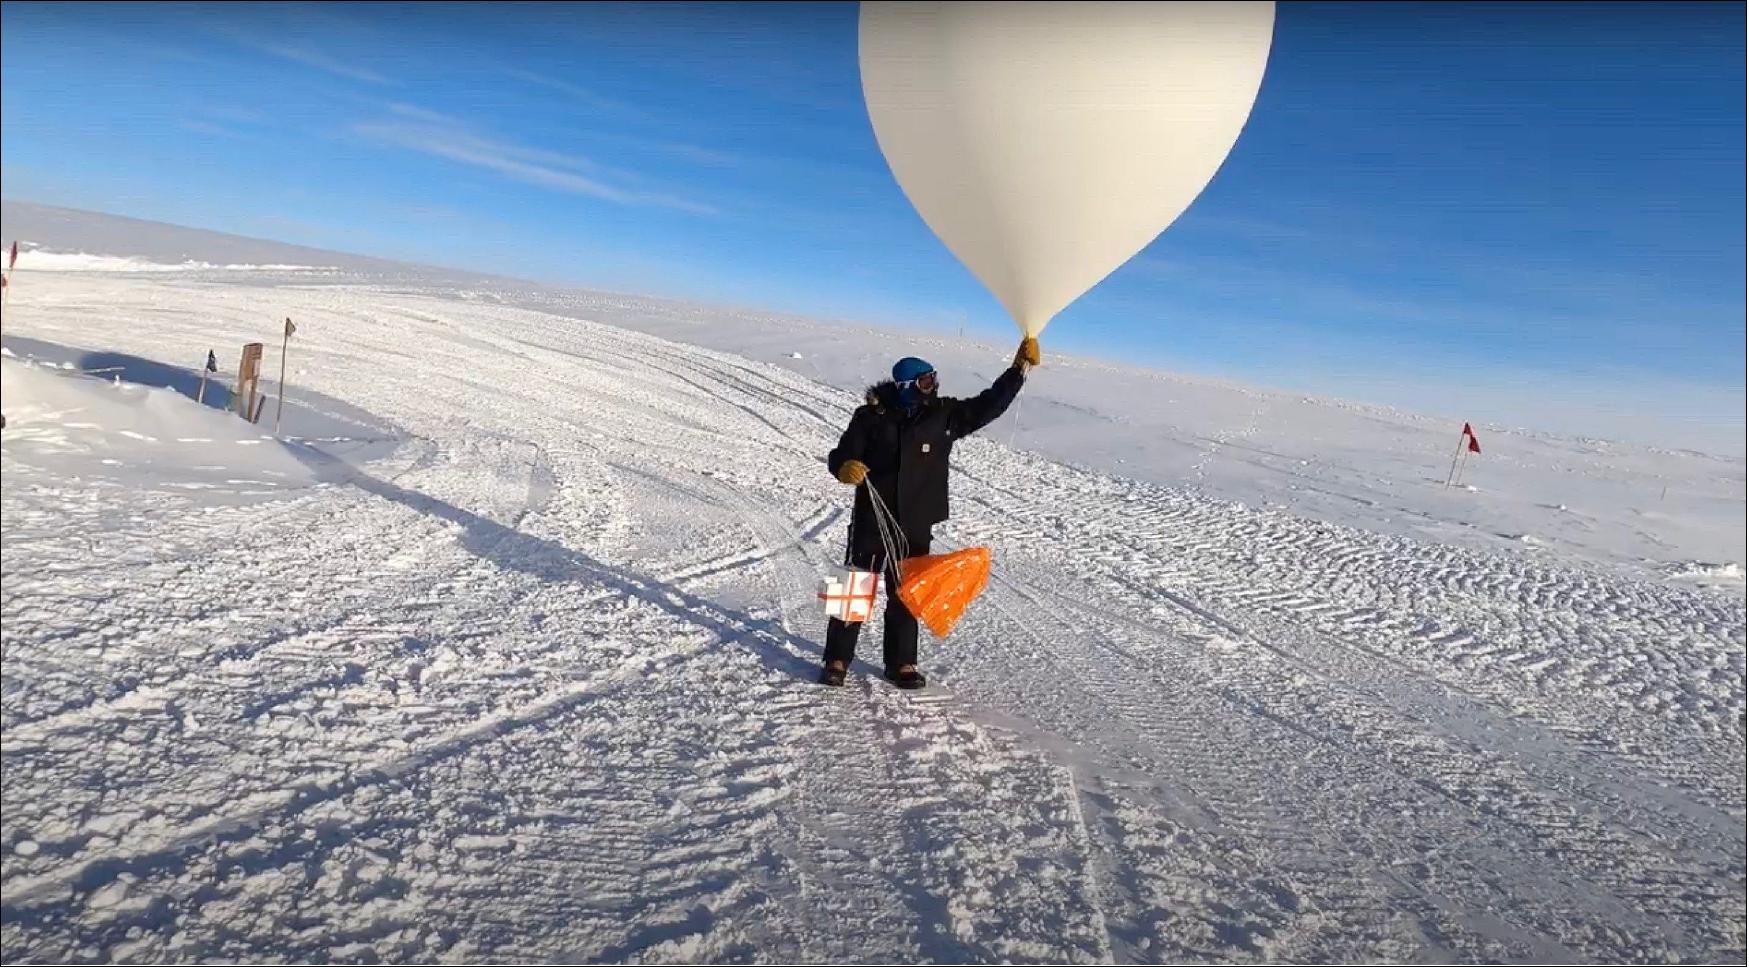 Figure 13: A scientist launches a weather balloon carrying an ozonesonde from the South Pole Station in March of 2021 (image credits: NOAA Global Monitoring Laboratory)